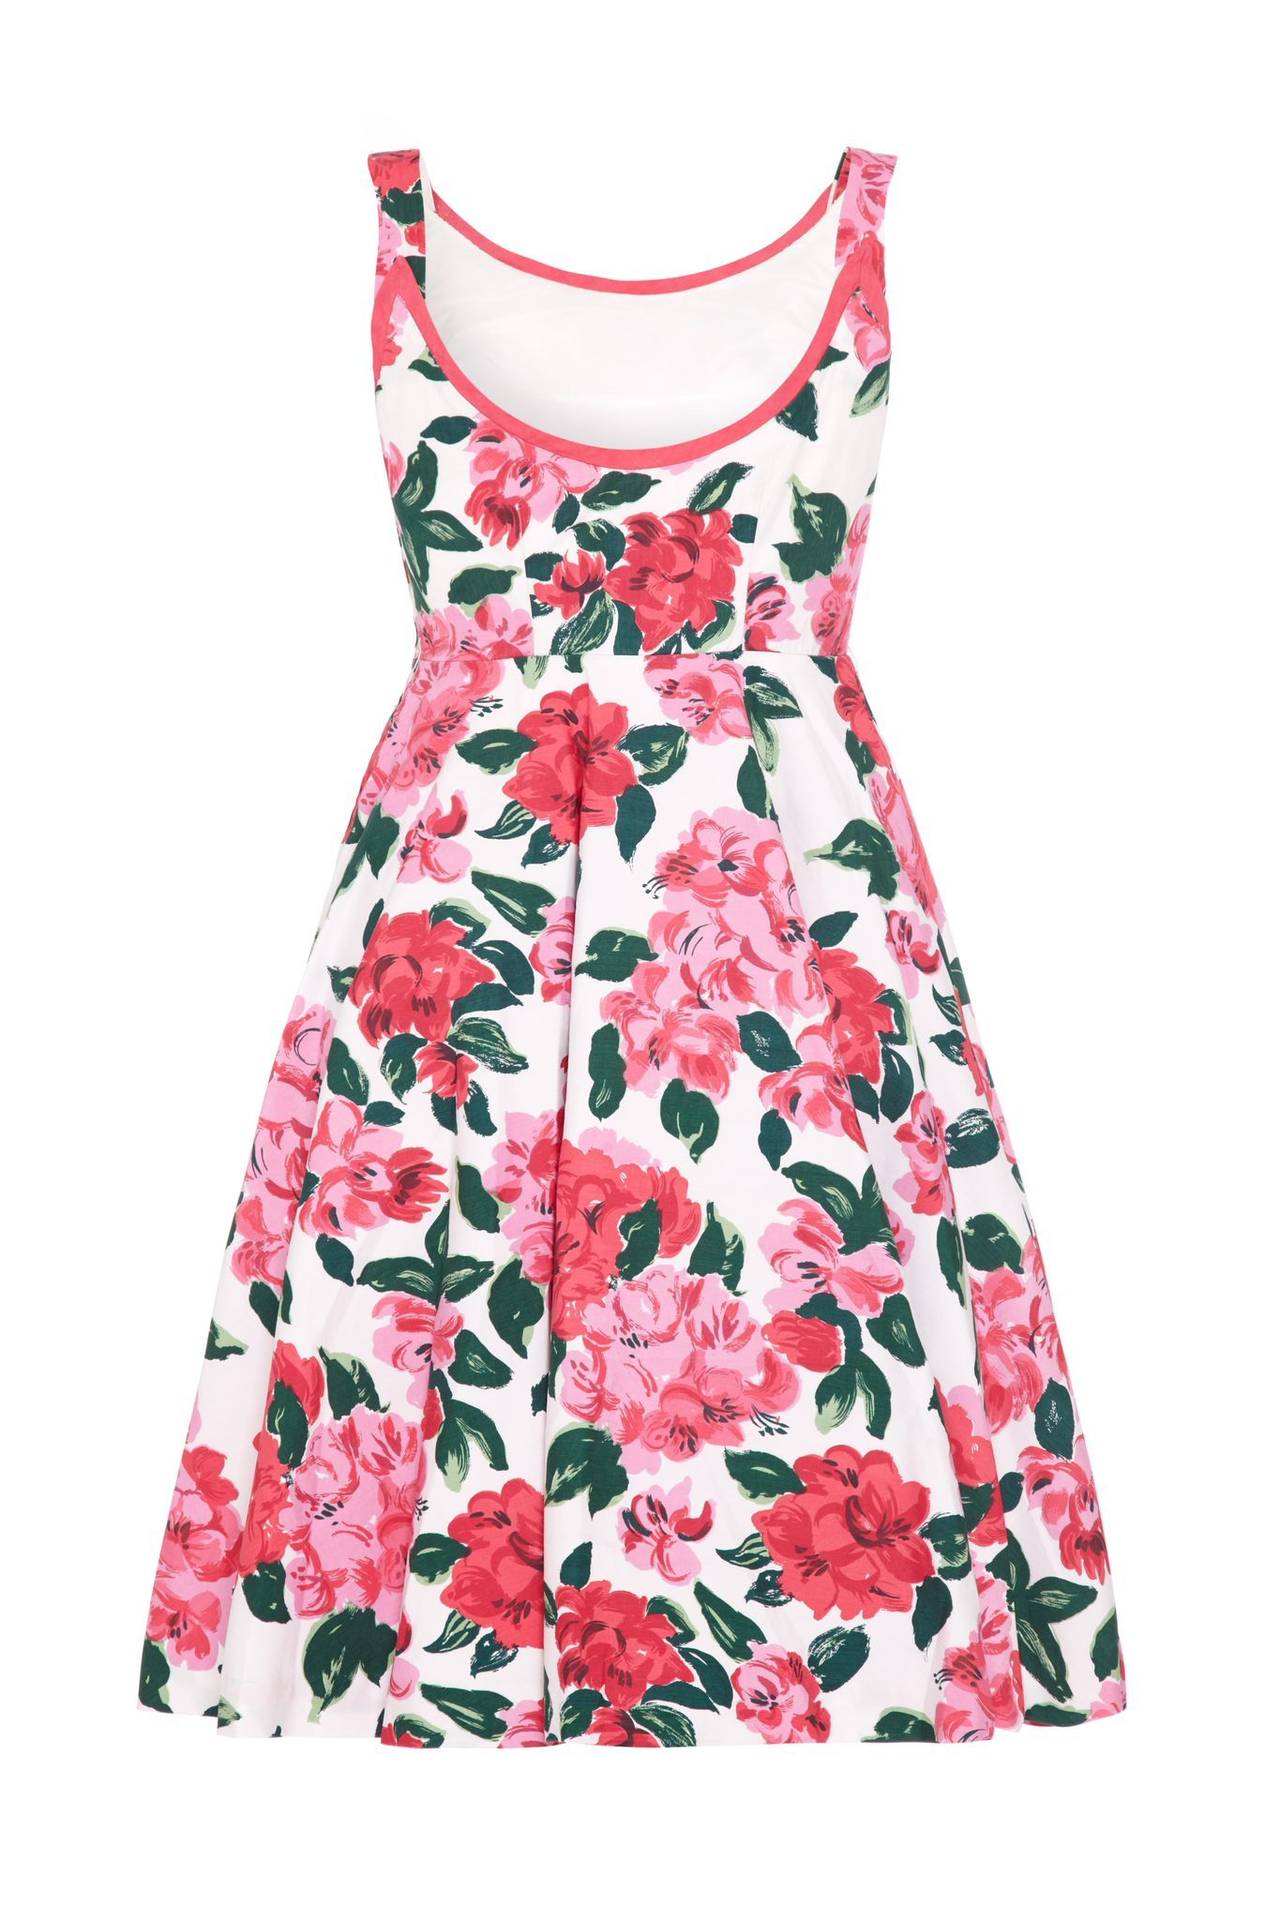 This beautiful 1950s white cotton sundress with pink floral print by respected British label Horrockses is in excellent vintage condition and of superb quality. This classic 1950s sun dress features a scoop neckline trimmed in fuchsia, an attractive